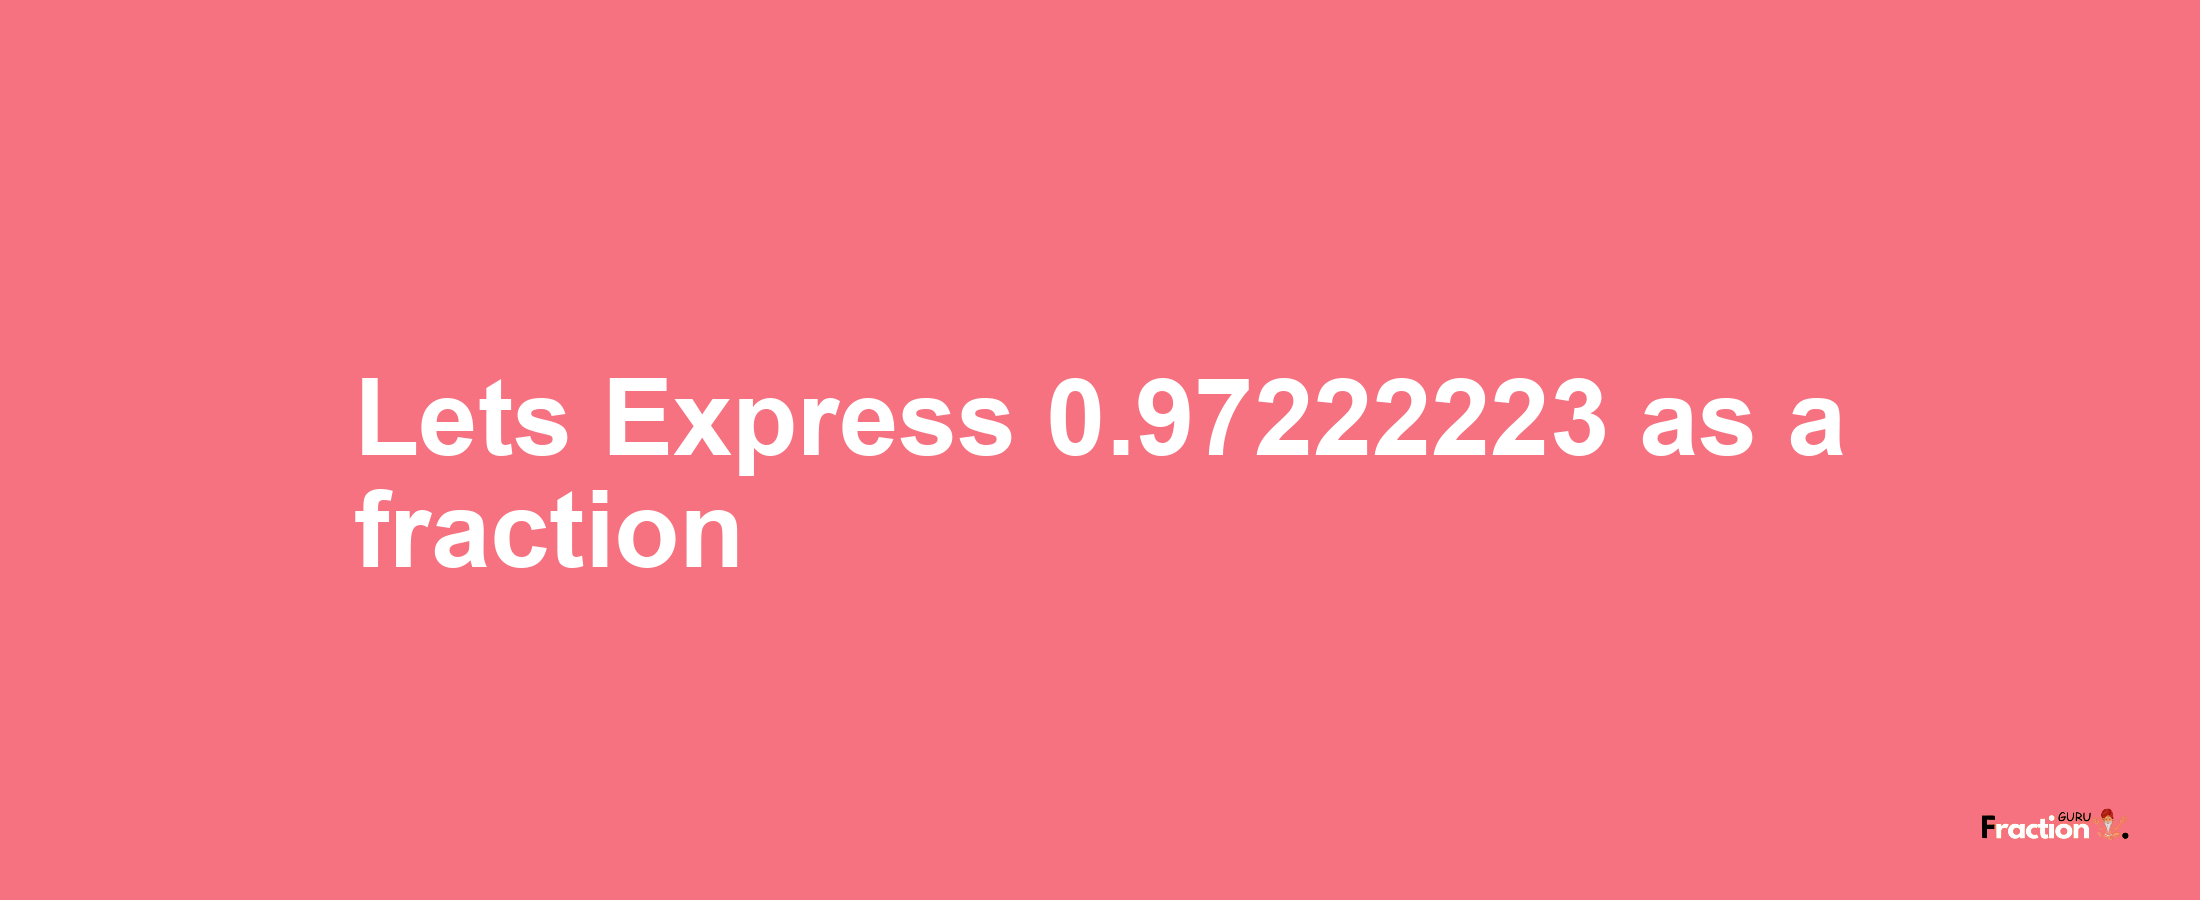 Lets Express 0.97222223 as afraction